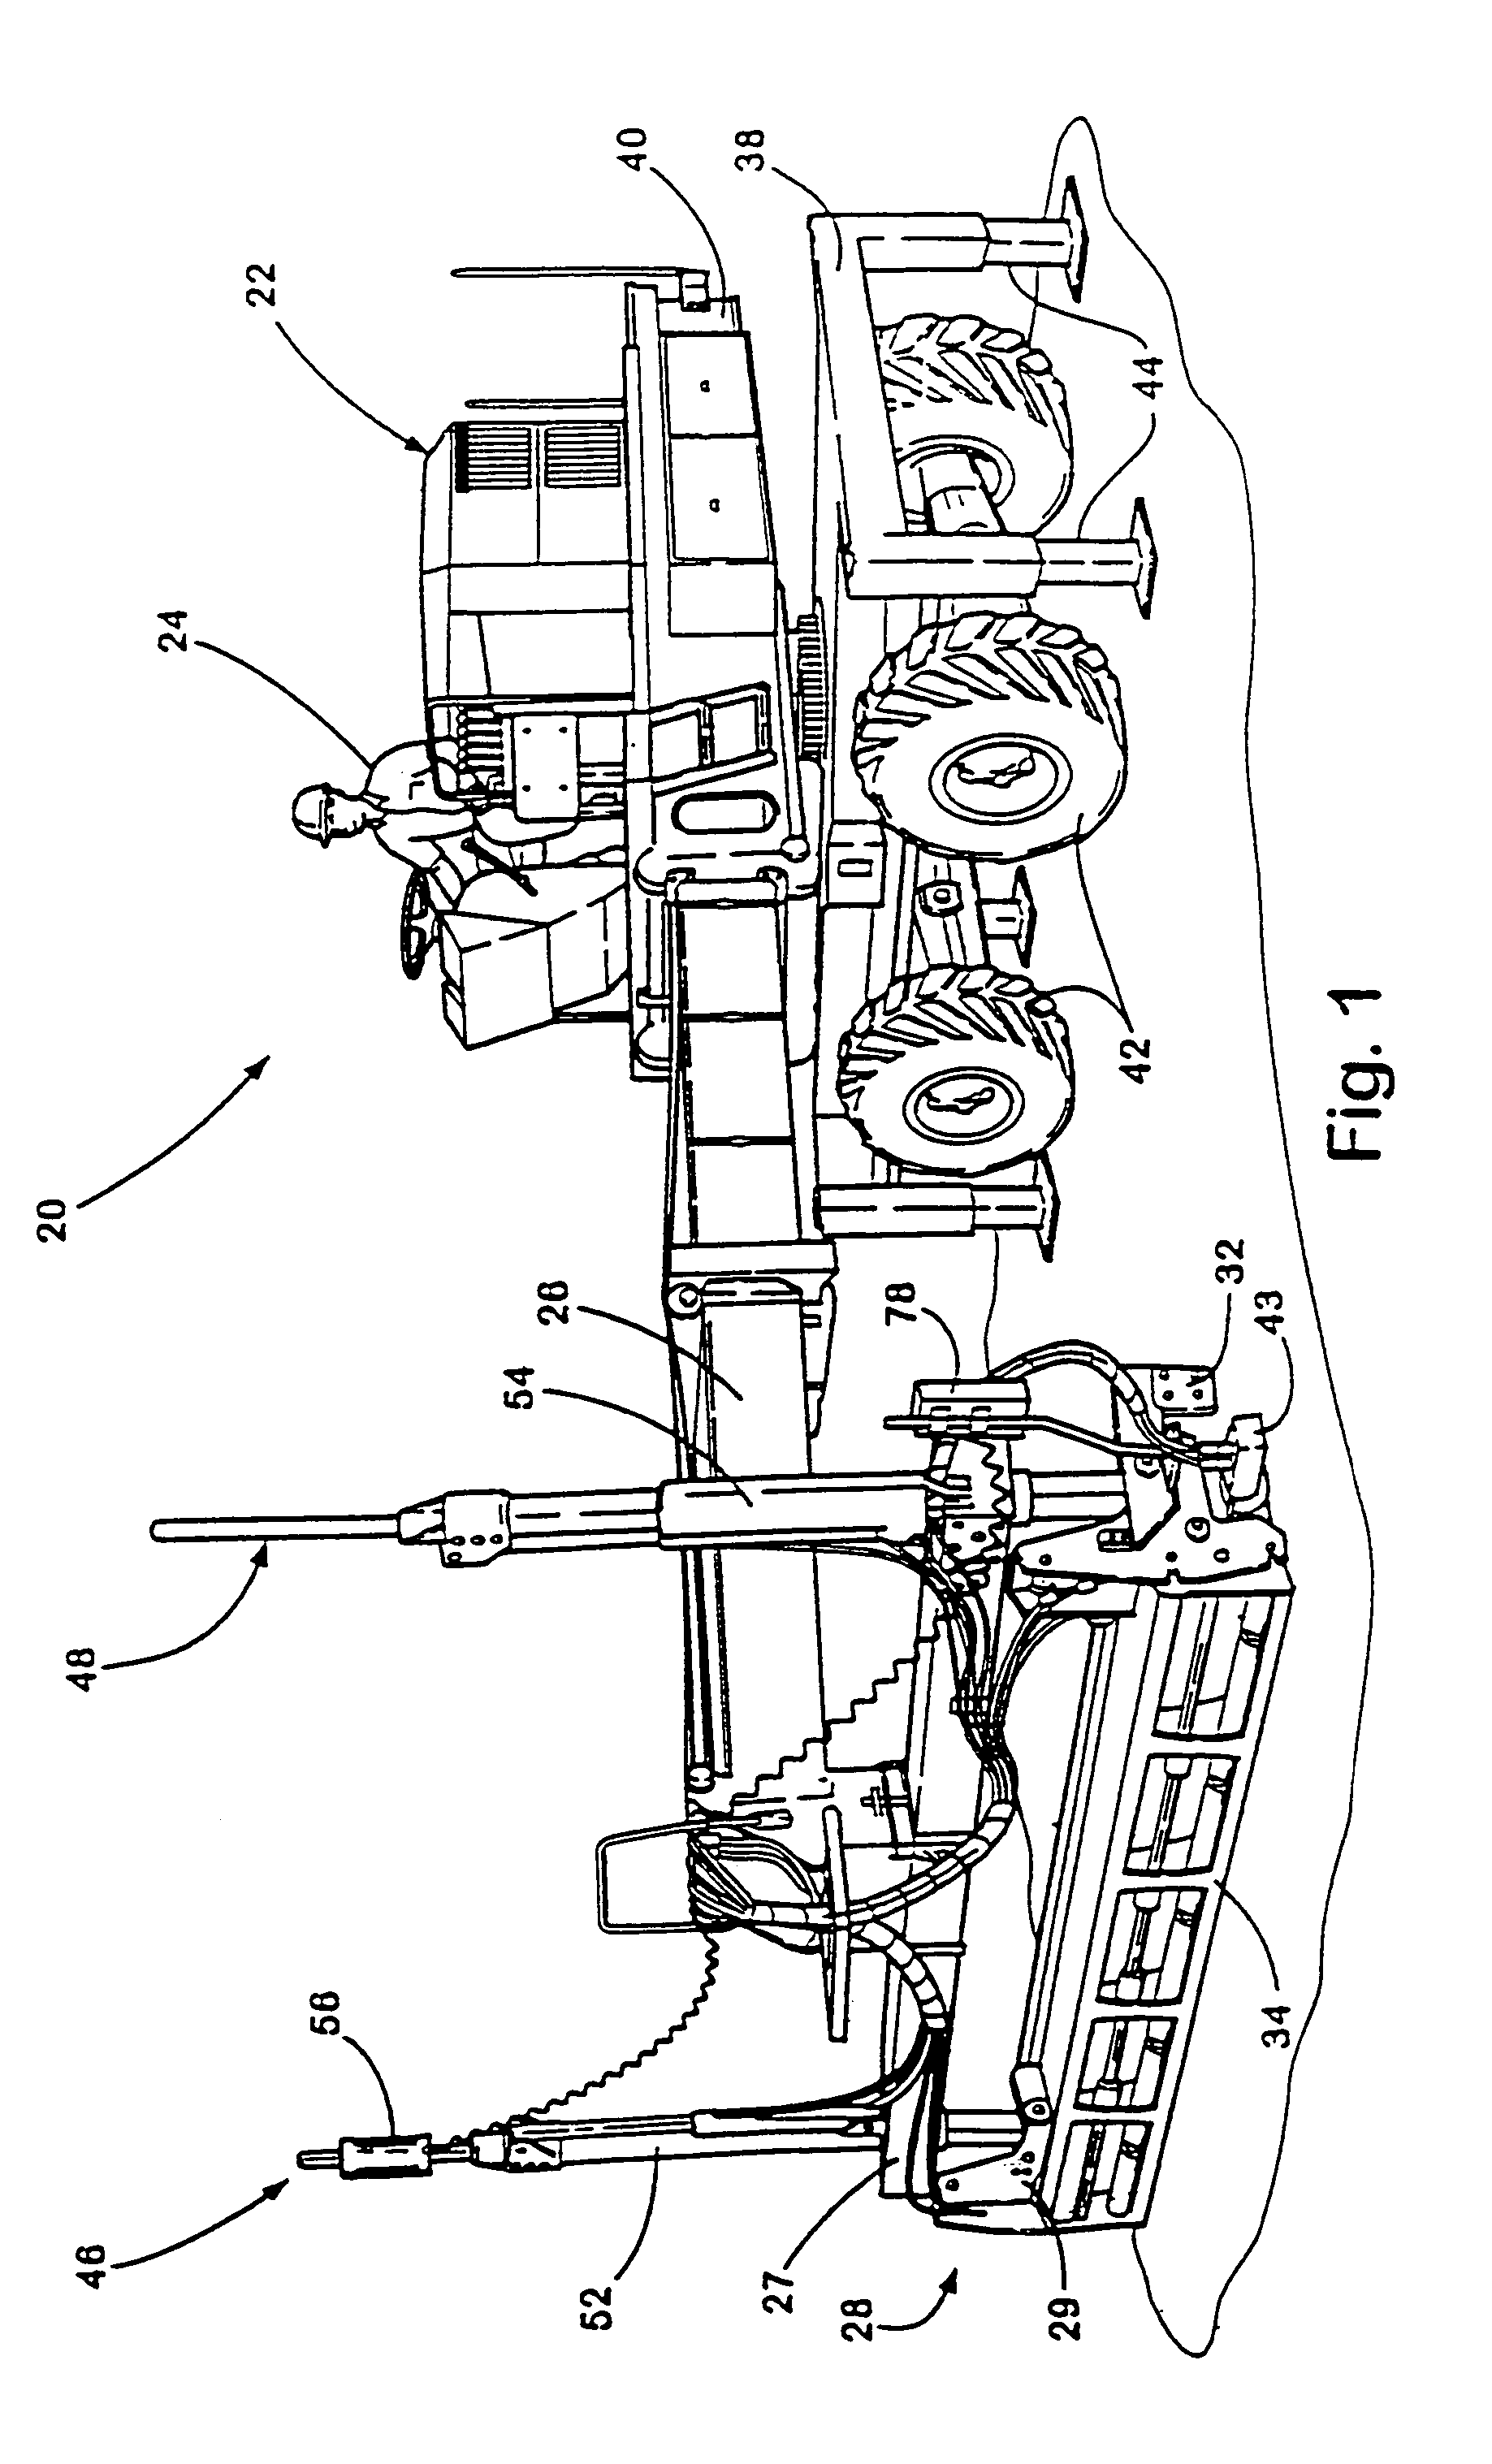 Apparatus and method for three-dimensional contouring